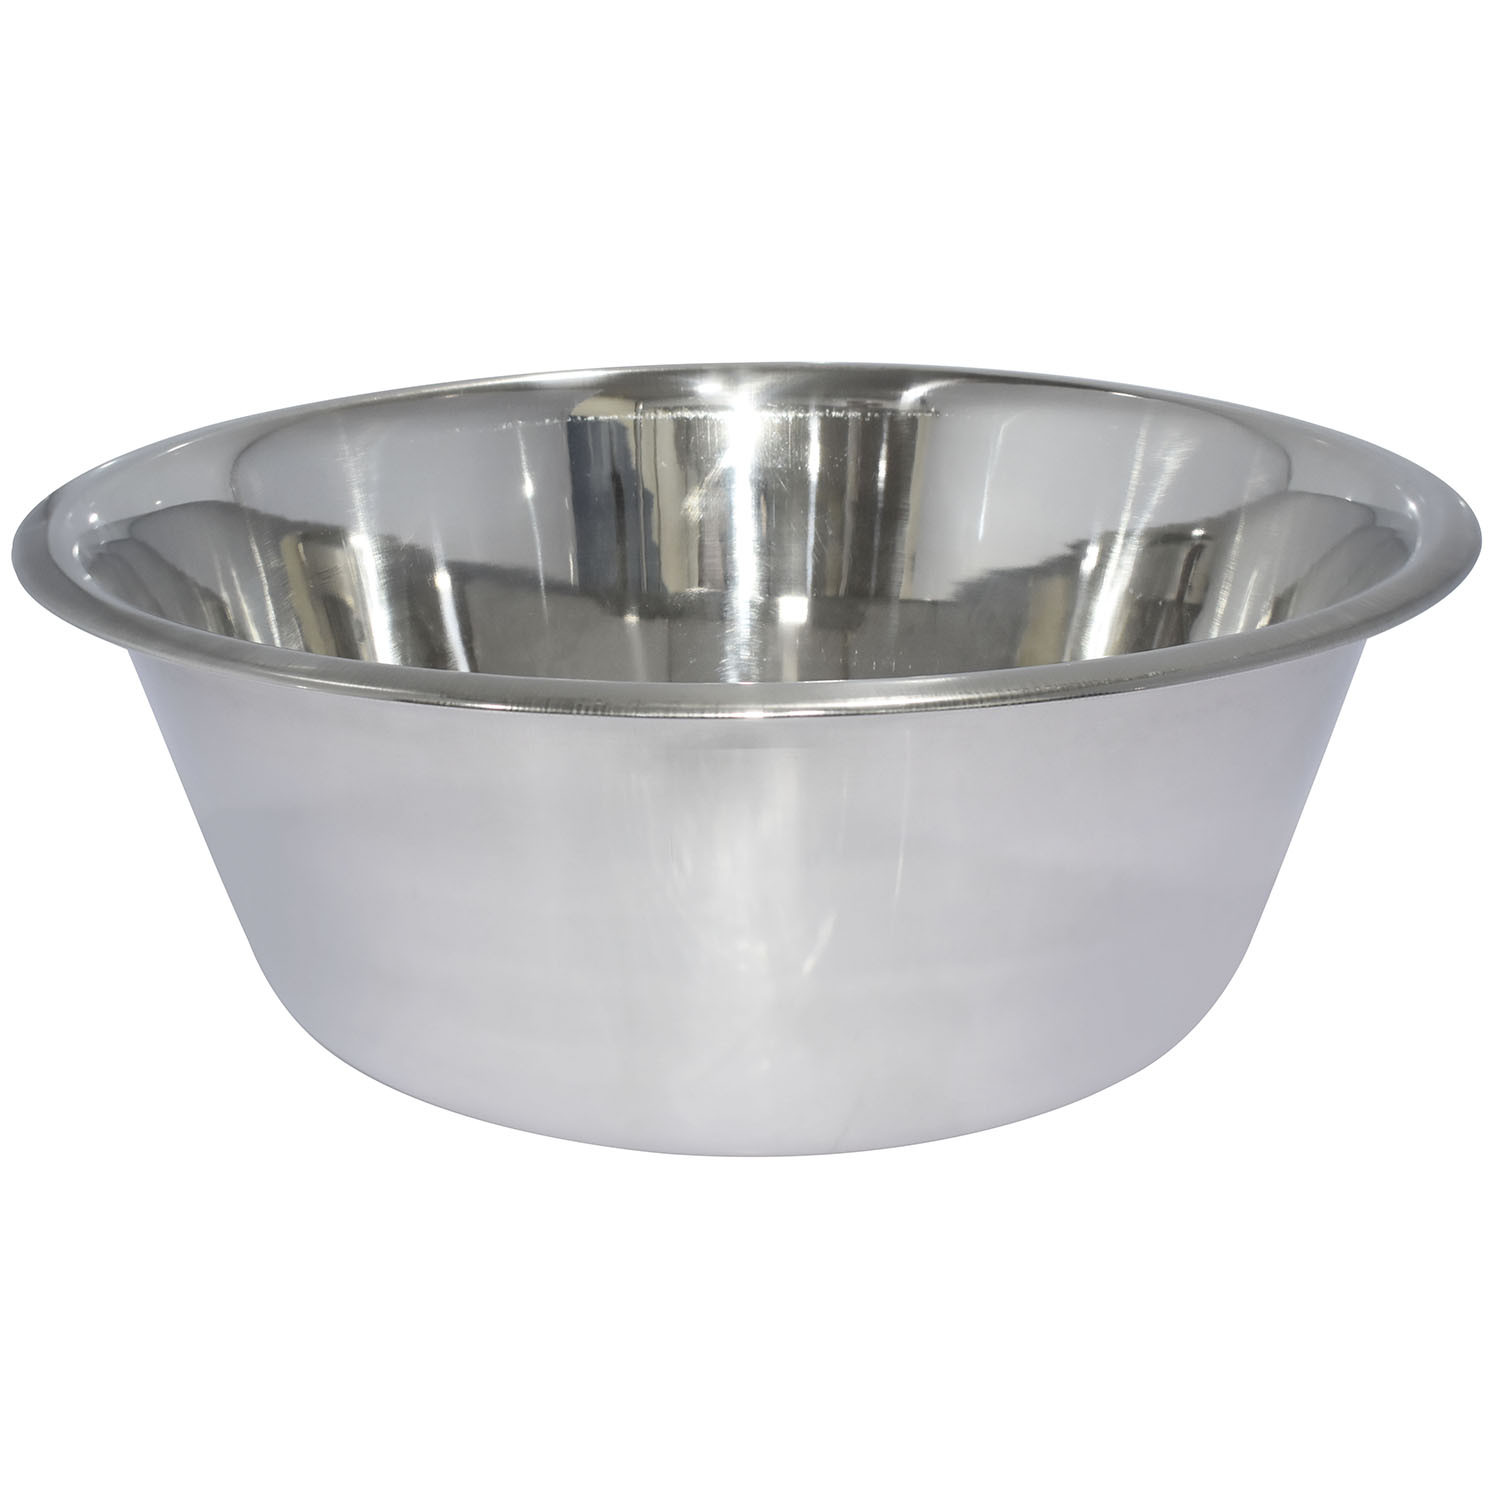 Clever Paws Extra Large Stainless Steel Pet Bowl Image